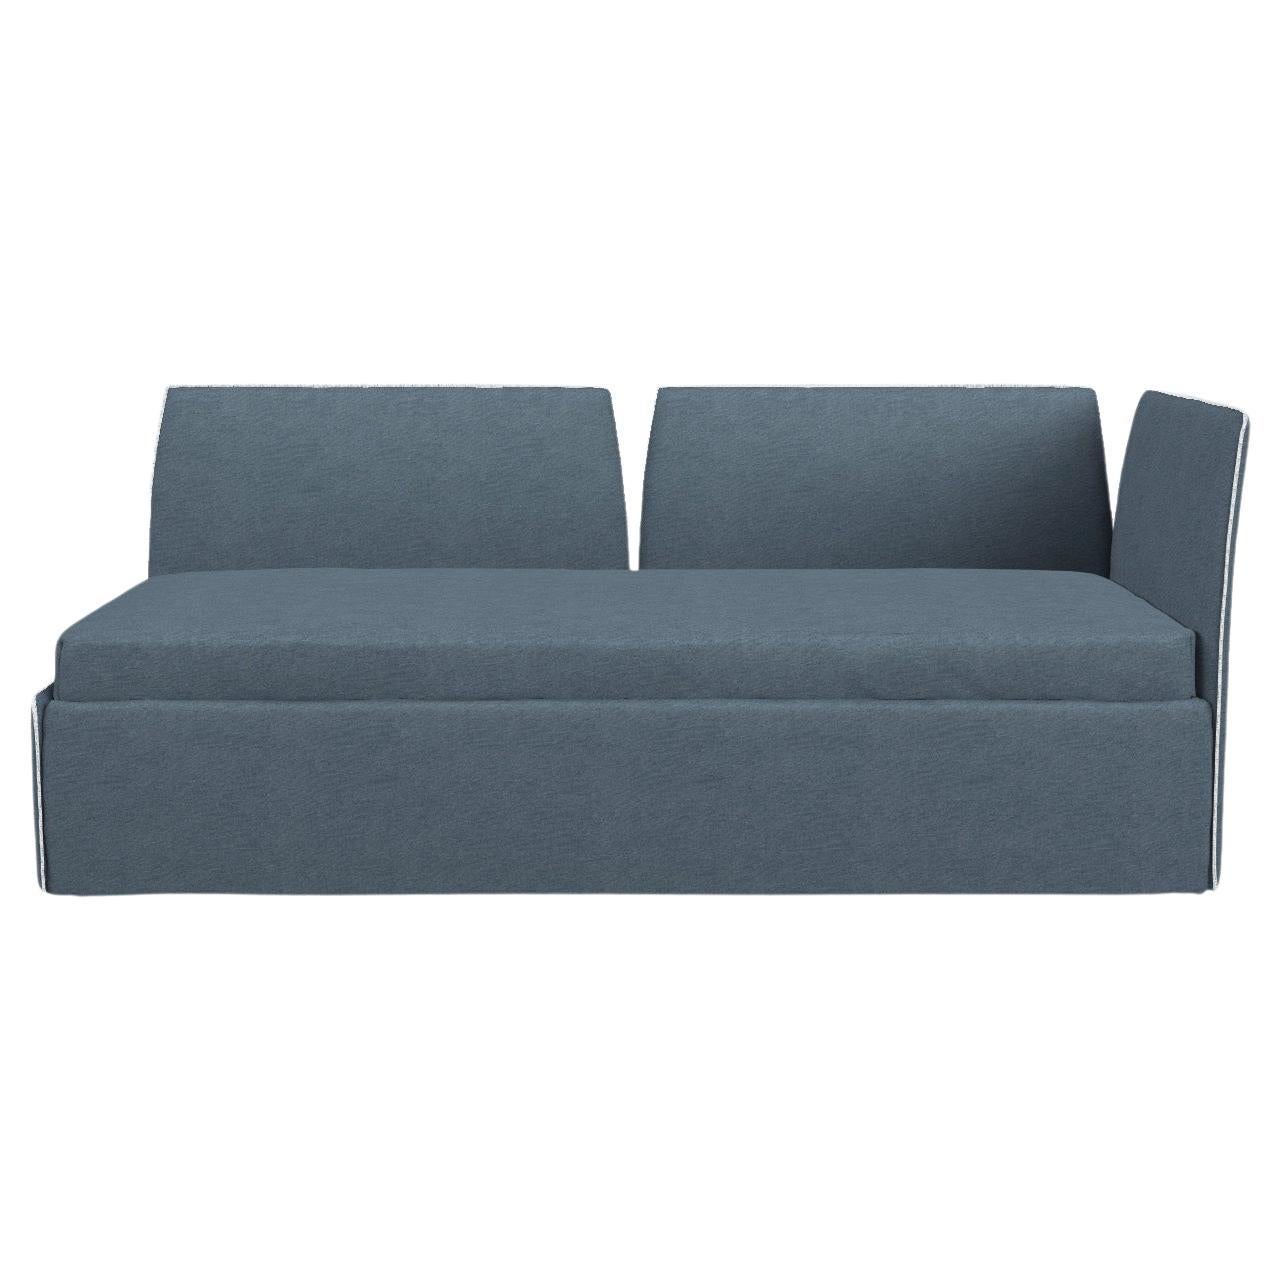 Gervasoni Open 4 Small Modular Bed Sofa in Munch Upholstery by Paola Navone For Sale